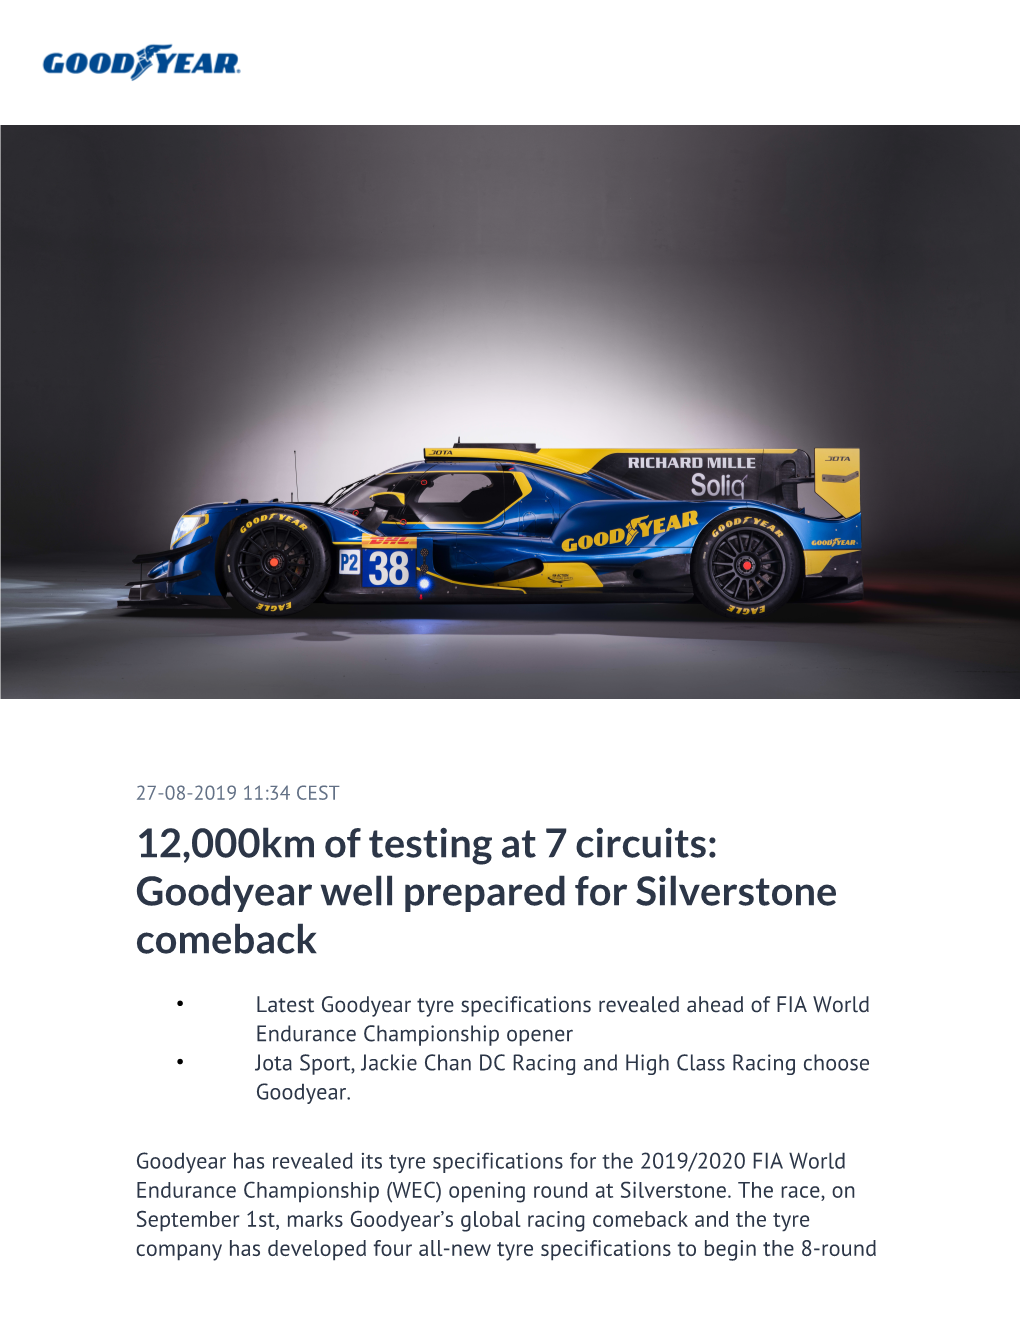 12,000Km of Testing at 7 Circuits: Goodyear Well Prepared for Silverstone Comeback